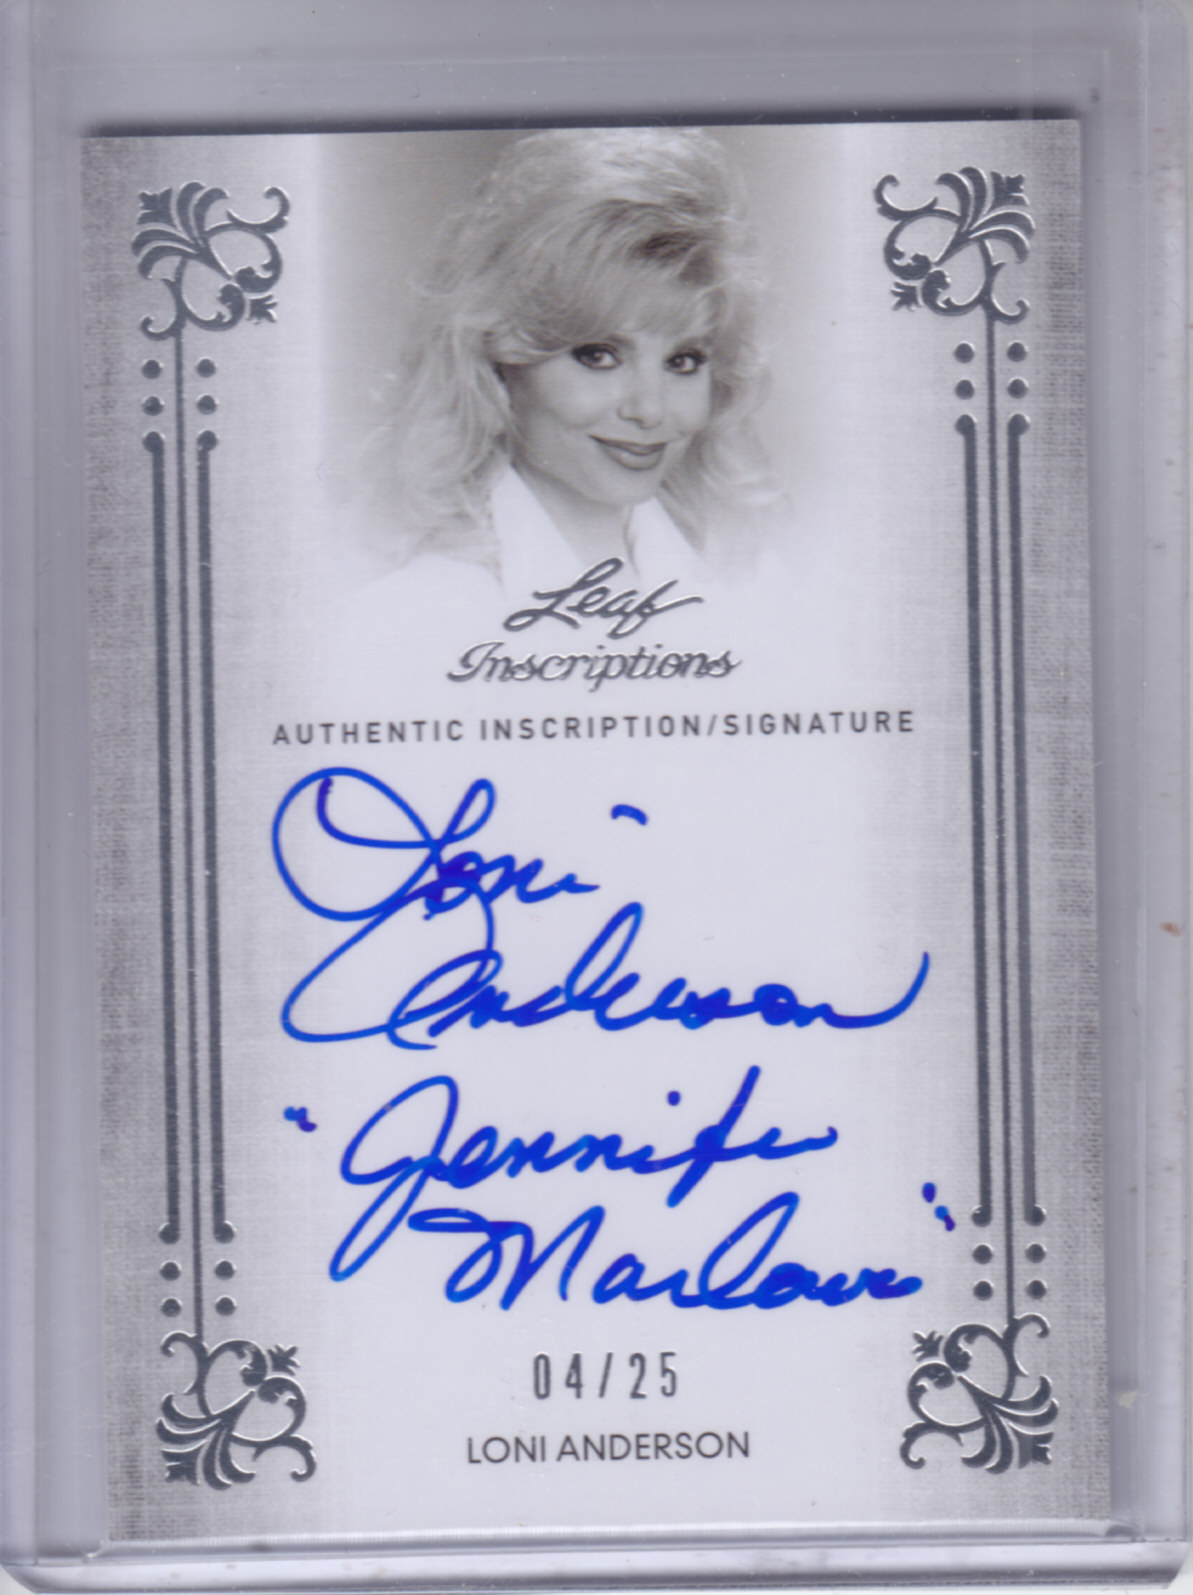  Loni Anderson player image